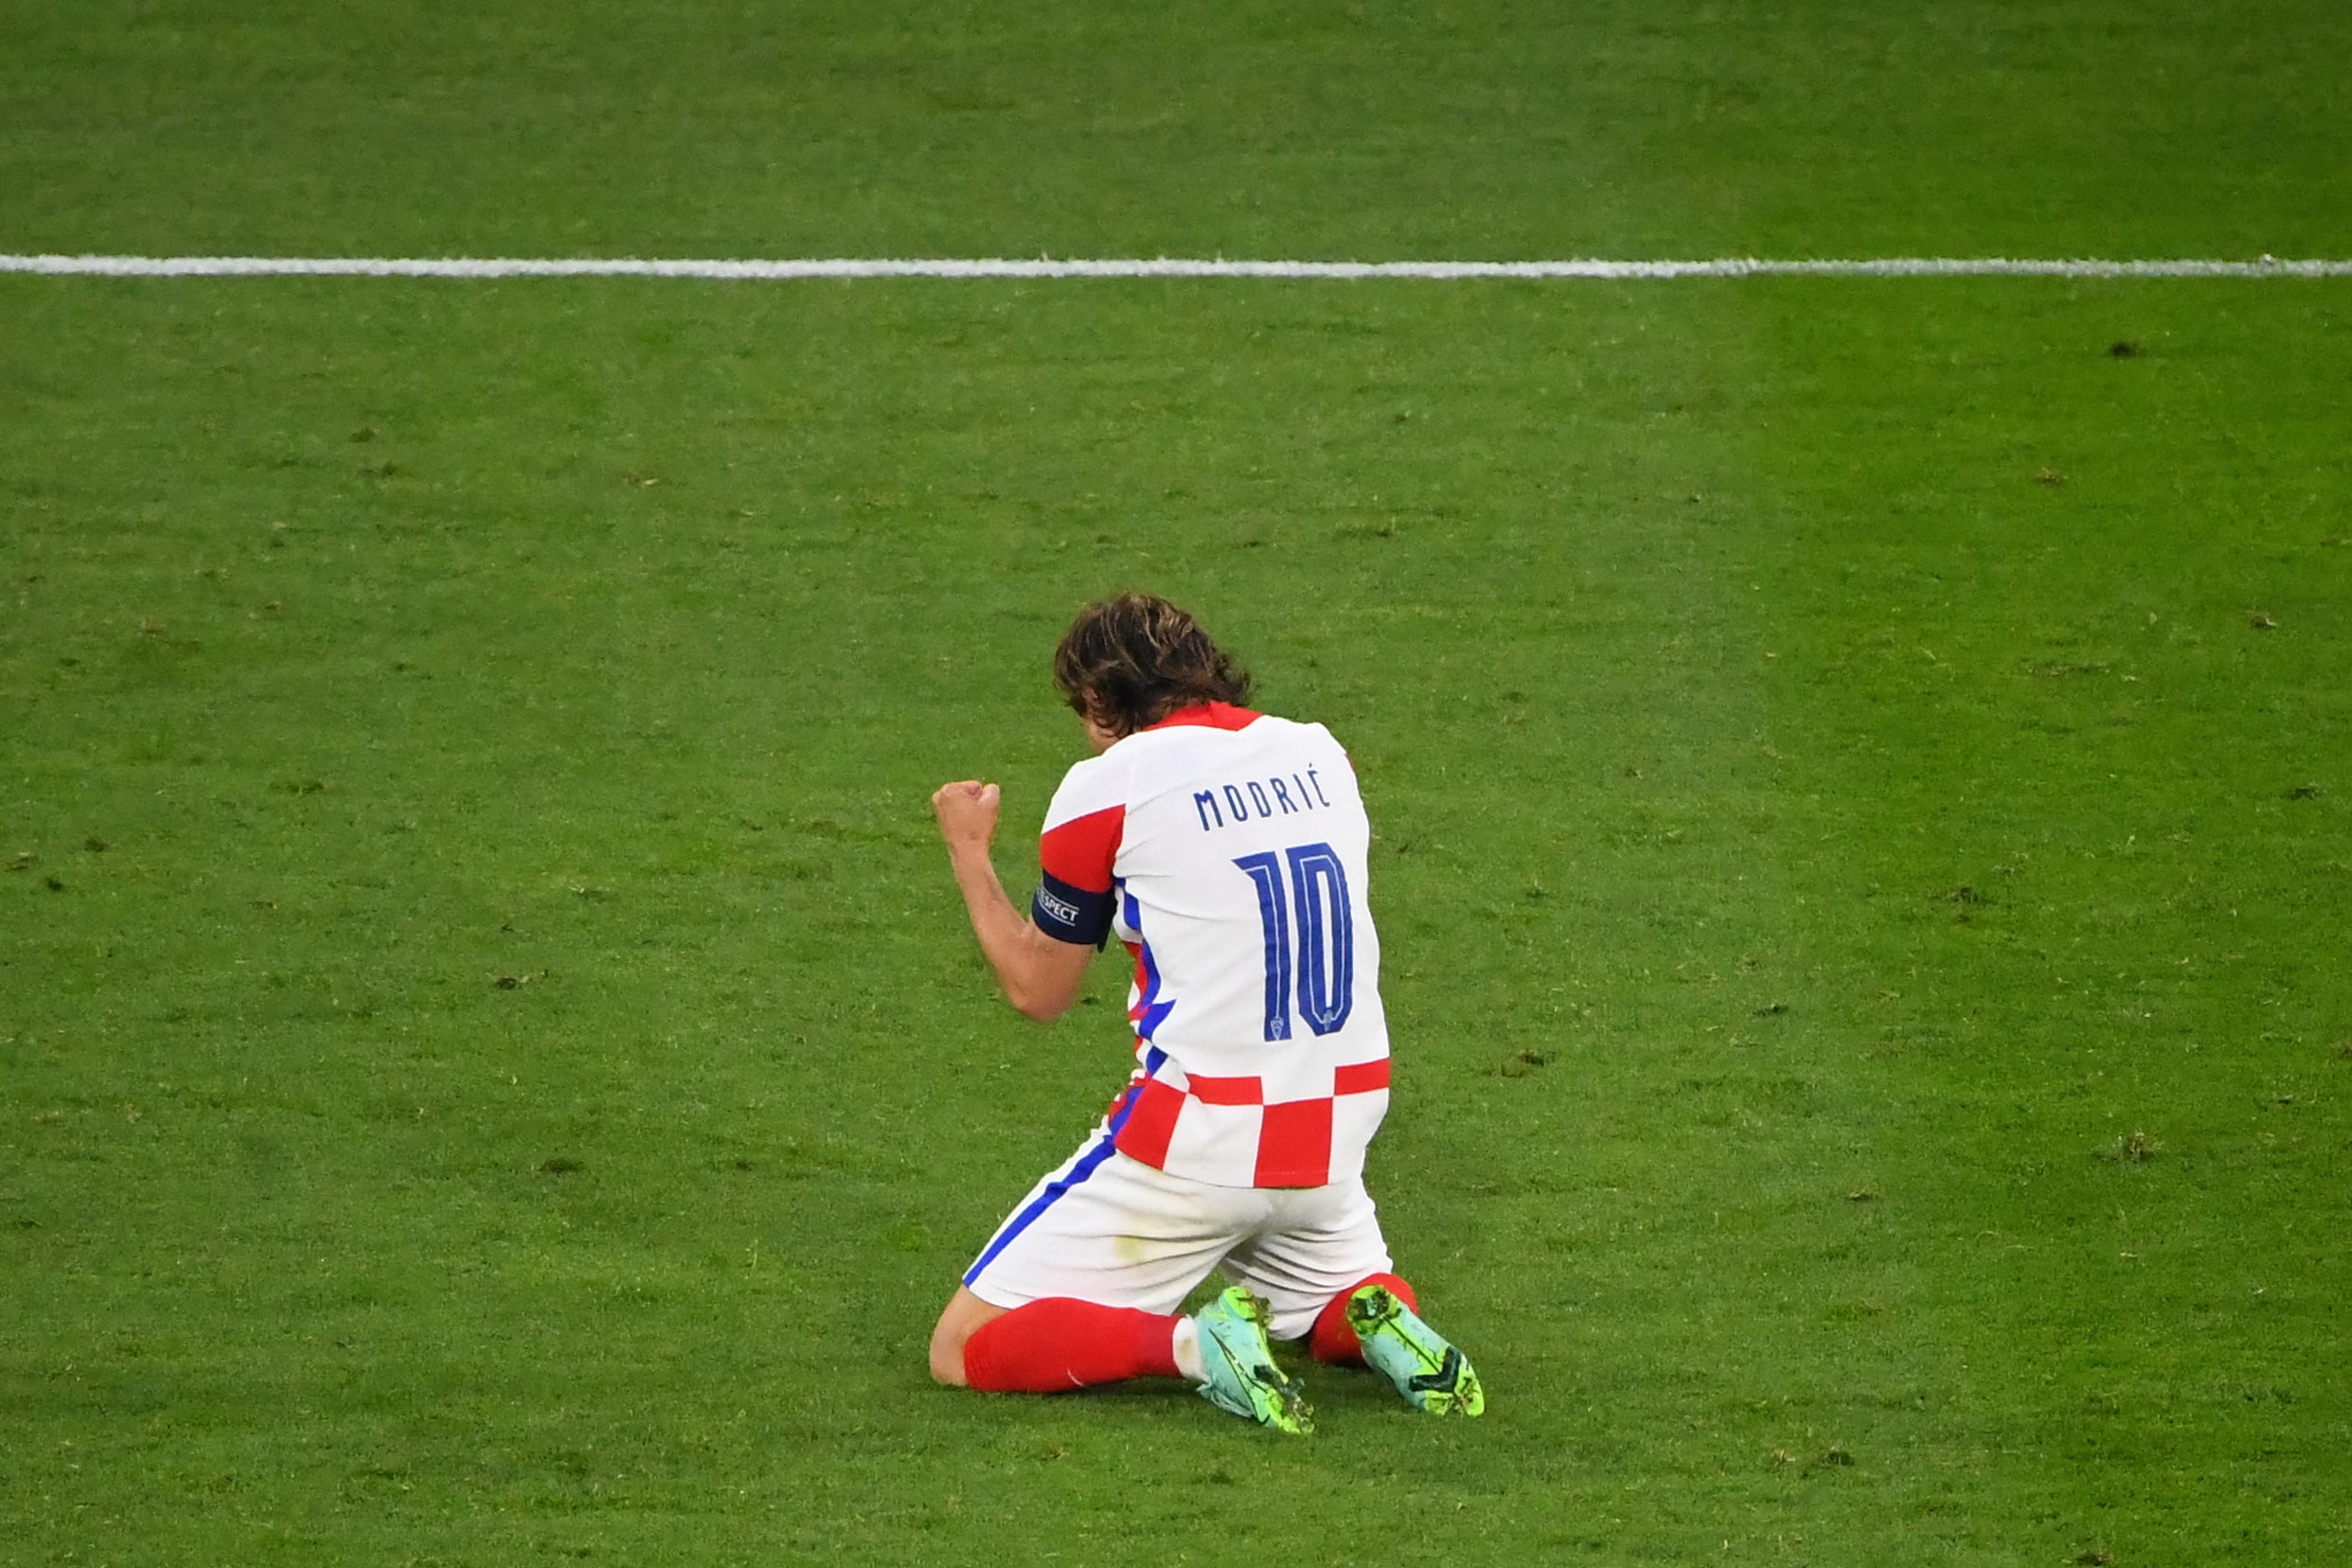 Modric’s performance was crucial in Croatia’s victory